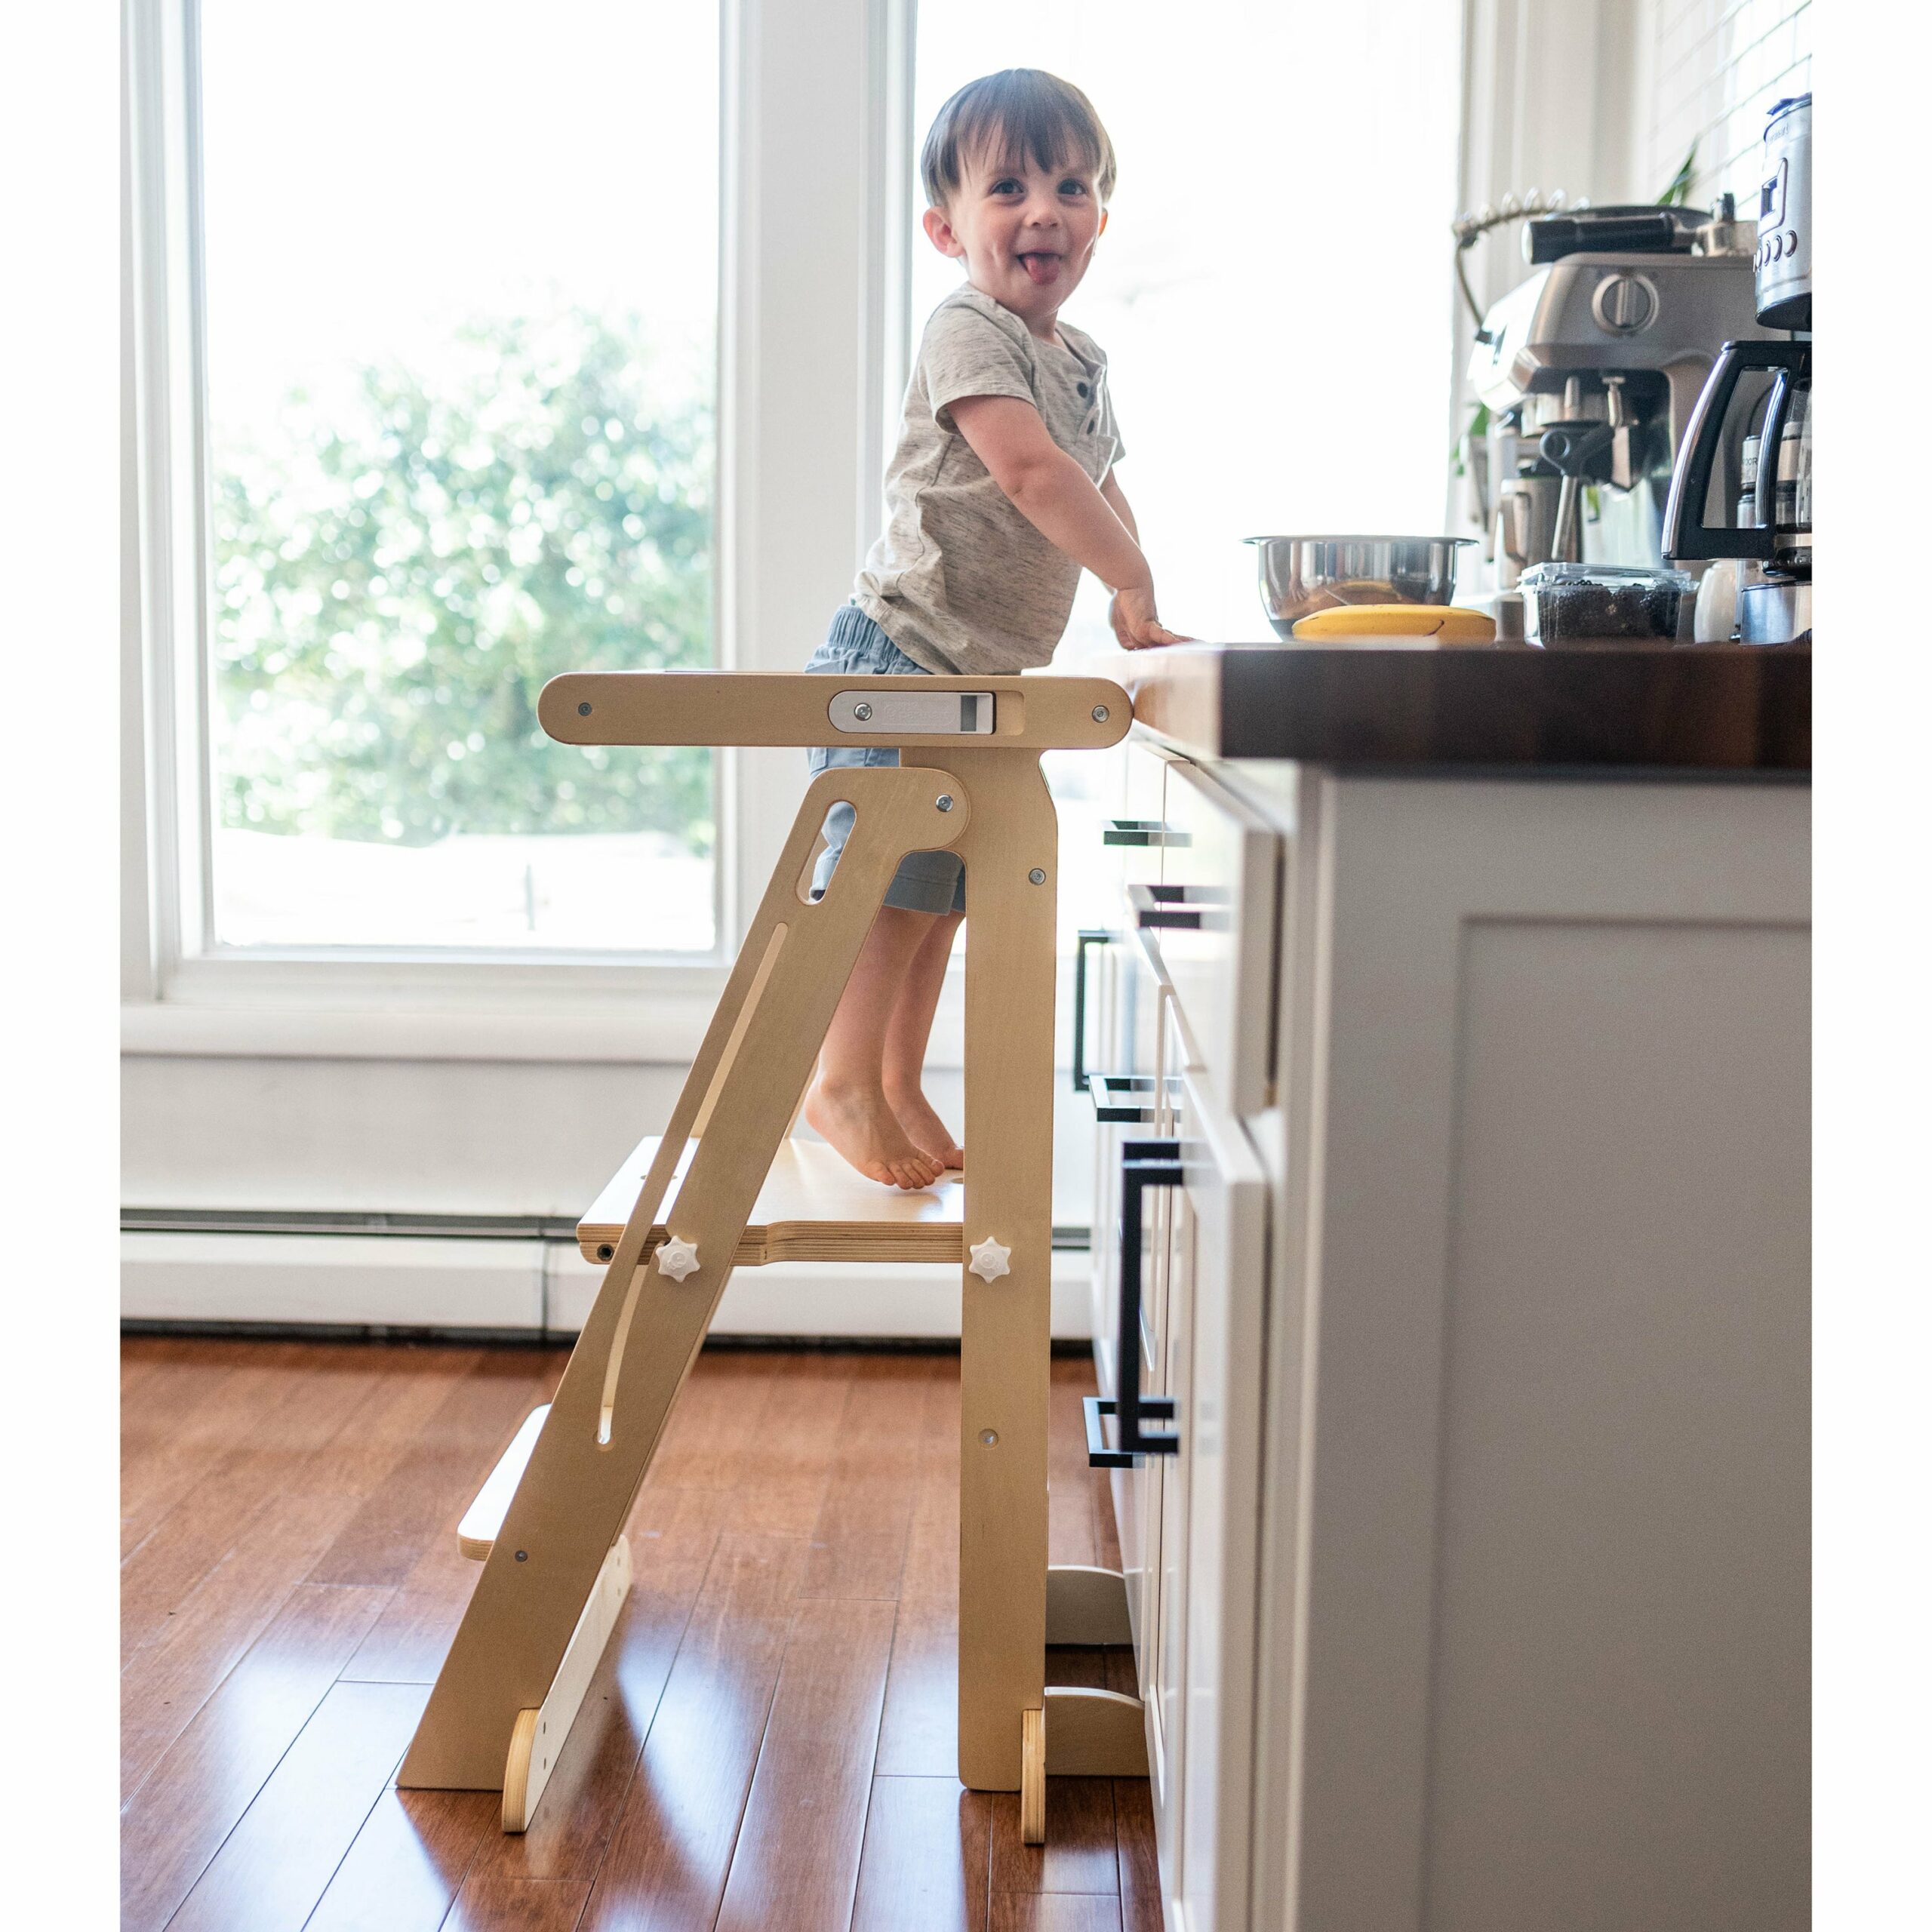 A young boy stands at a kitchen counter using a folding wooden learning tower.